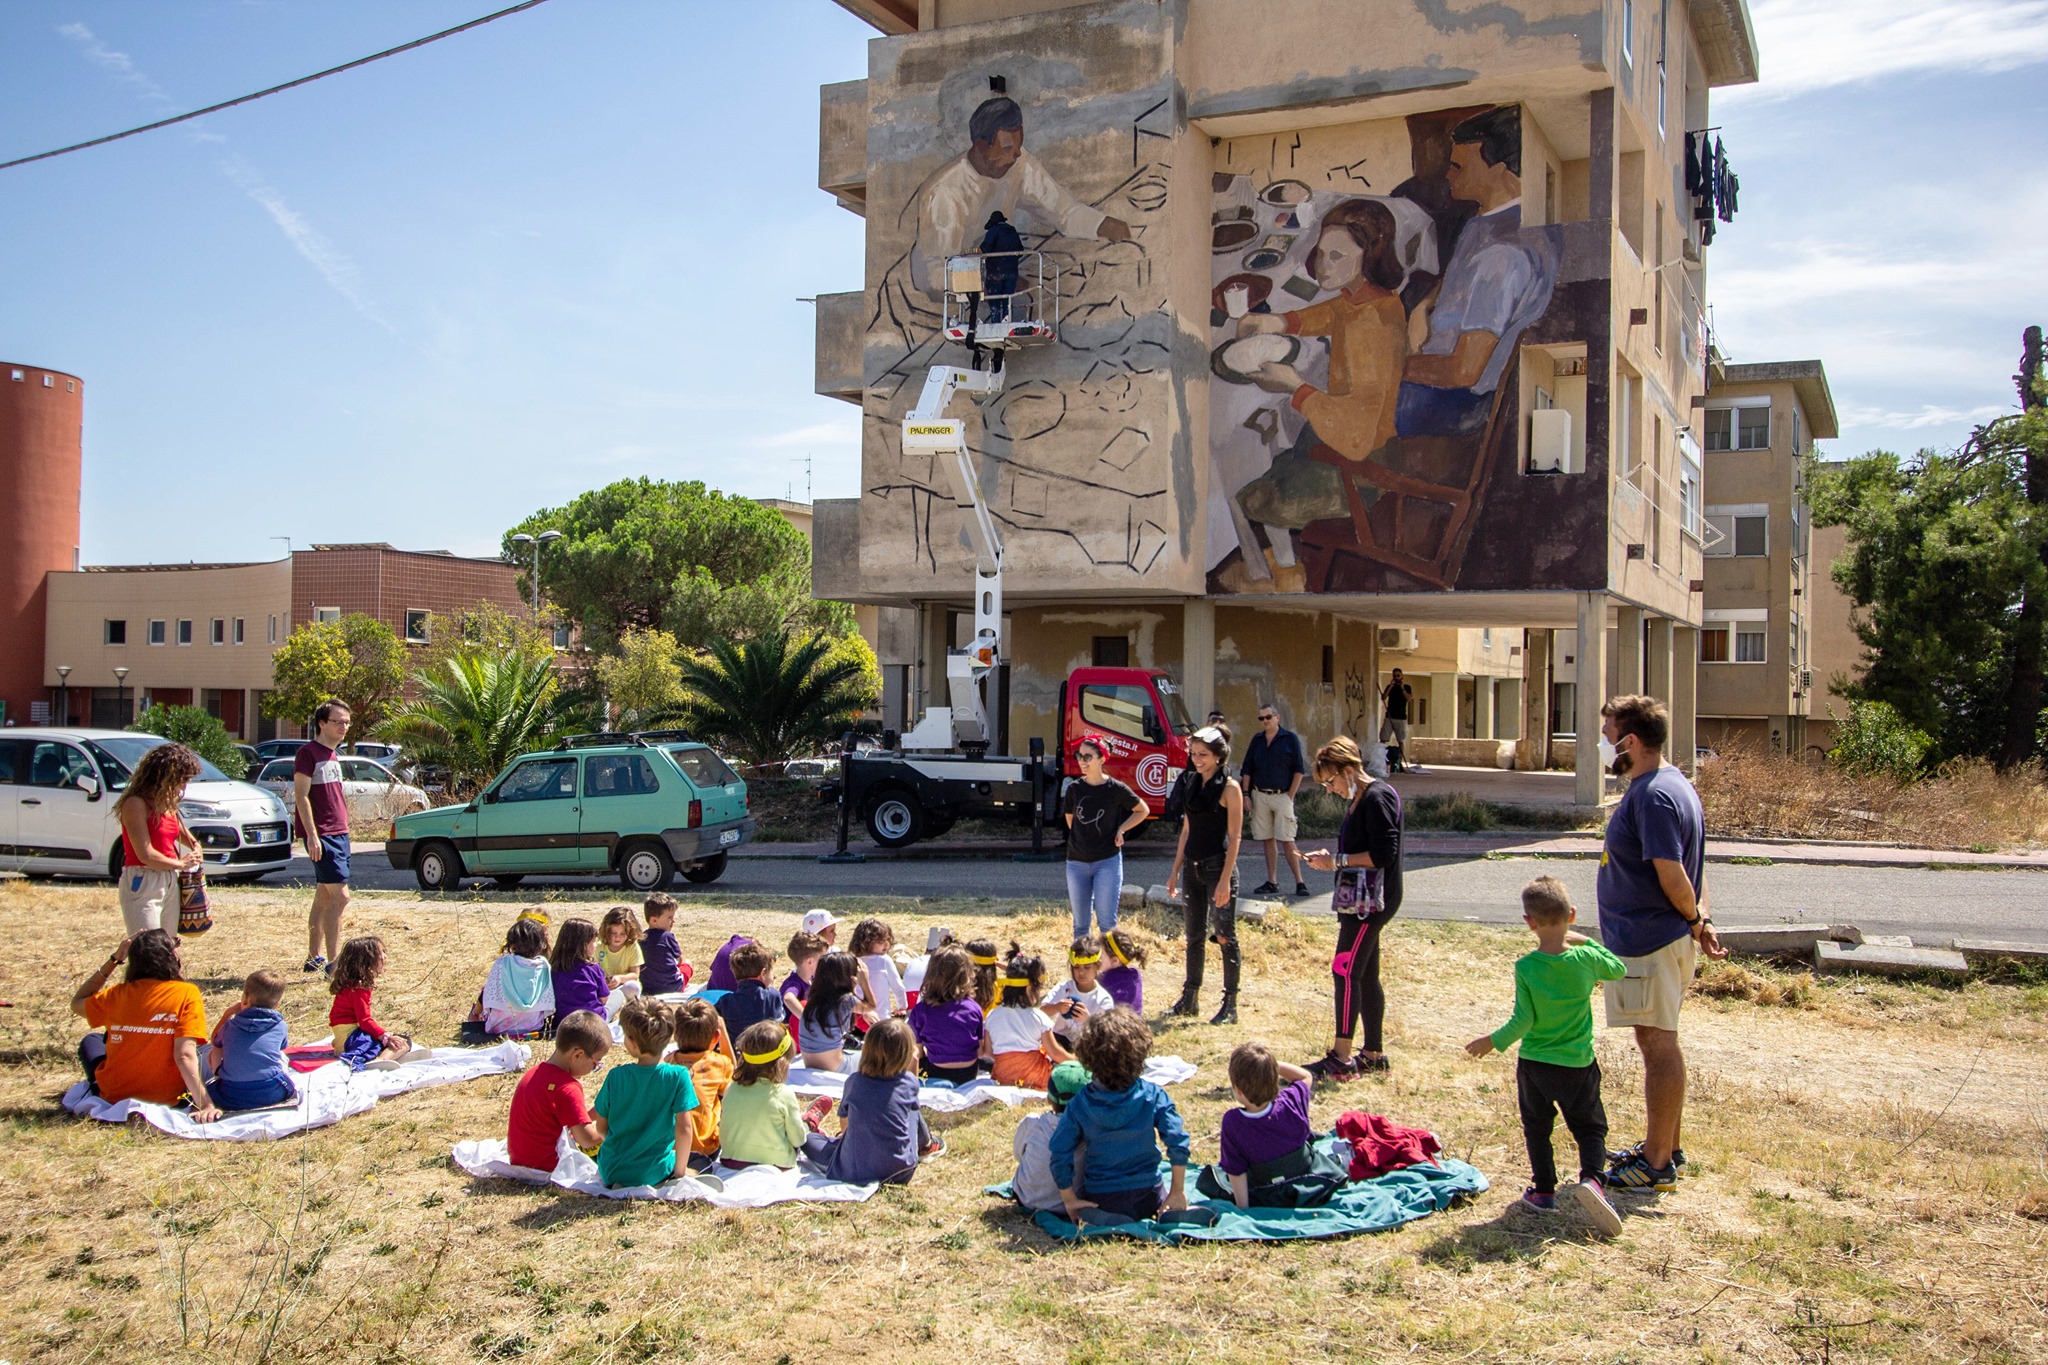 You are currently viewing Matera’s Atelier d’Arte Pubblica (MAAP) – A successful public art initiative in Italy